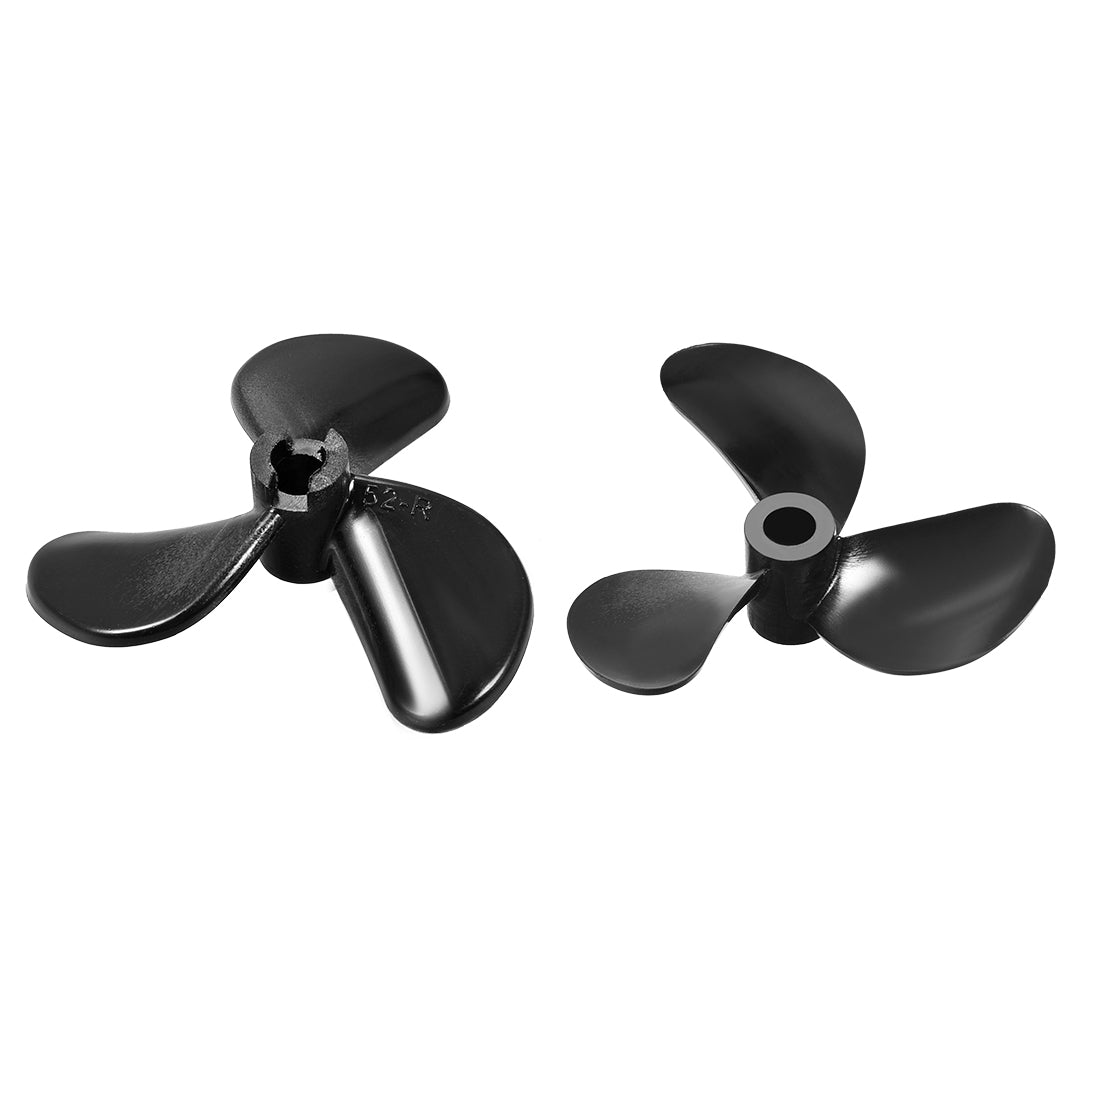 uxcell Uxcell RC Boat CCW Propeller 5mm Shaft 3 Vanes 52mm 1.4 P Fan Shape Pastic Black Rotating Propeller Props for RC Boat 2pcs